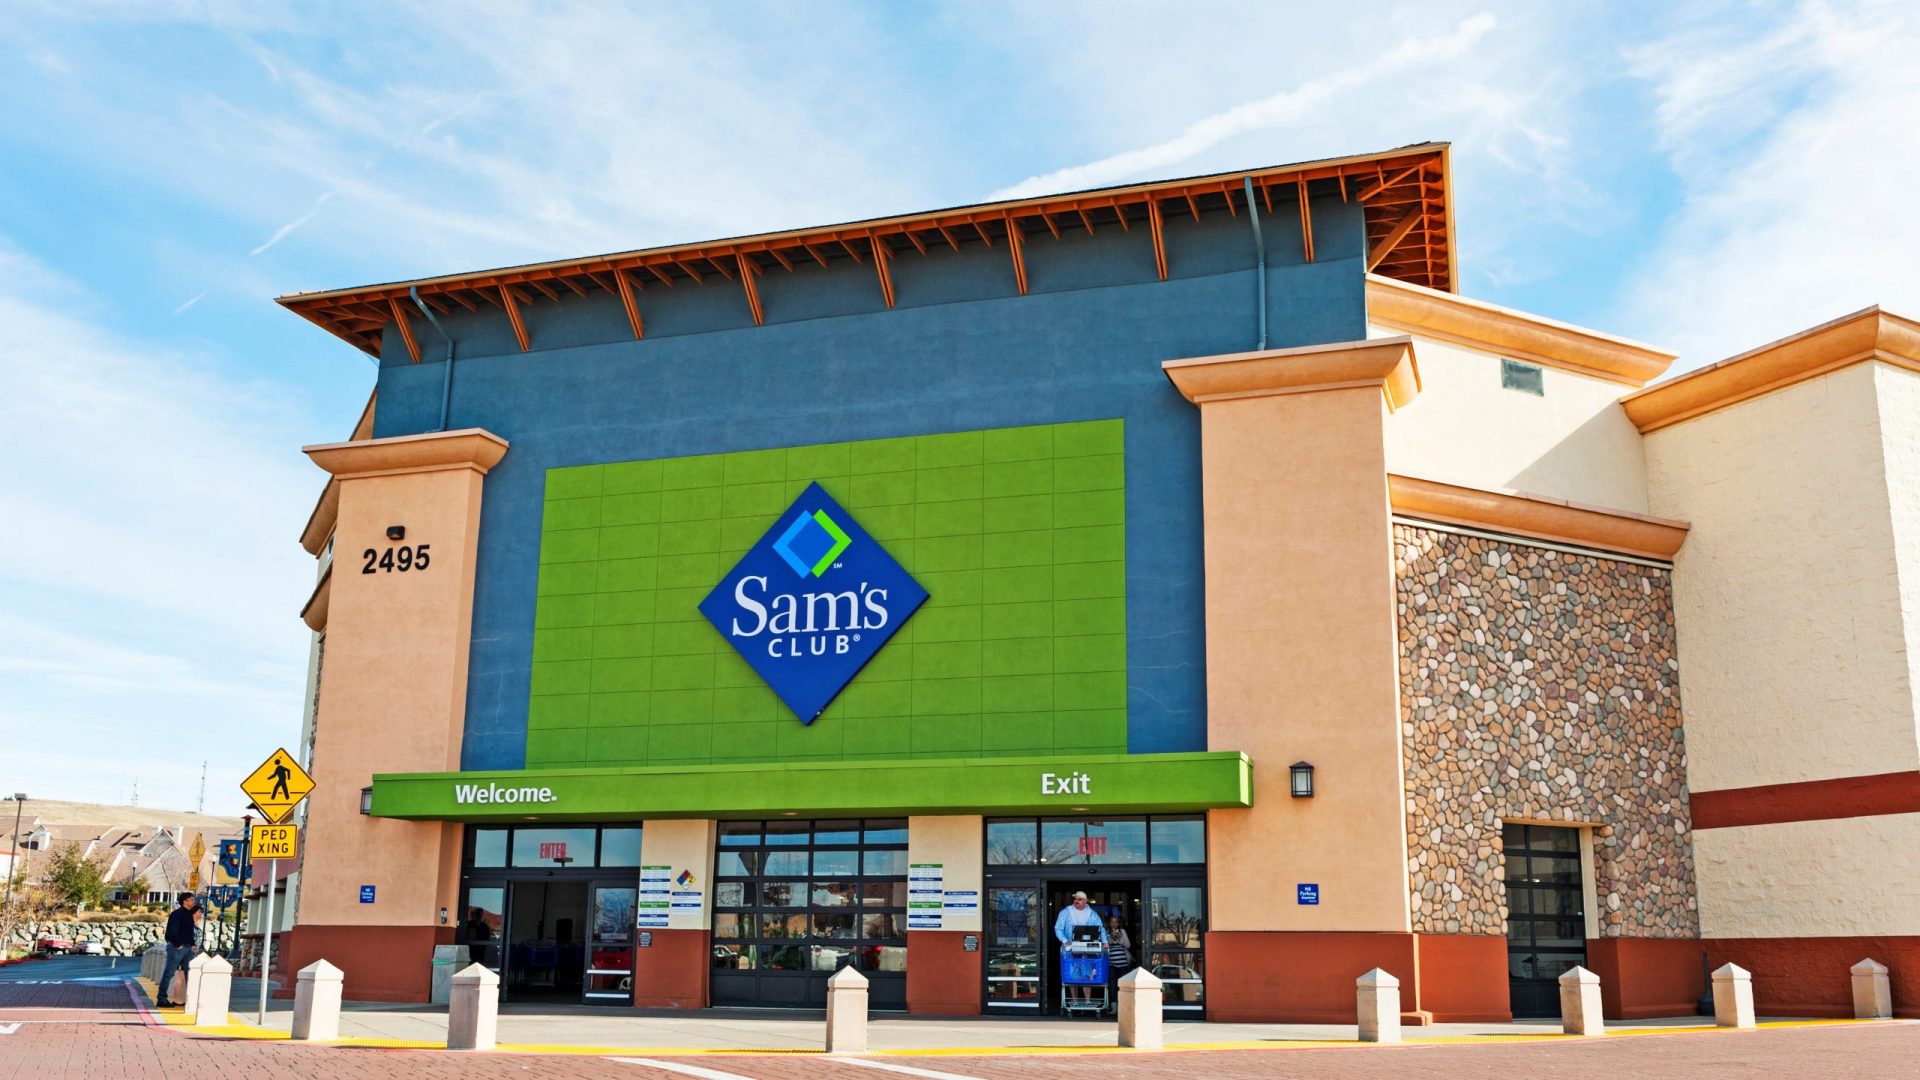 Sam’s Club Gas (Price, Hours, Discounts, Locations + More)